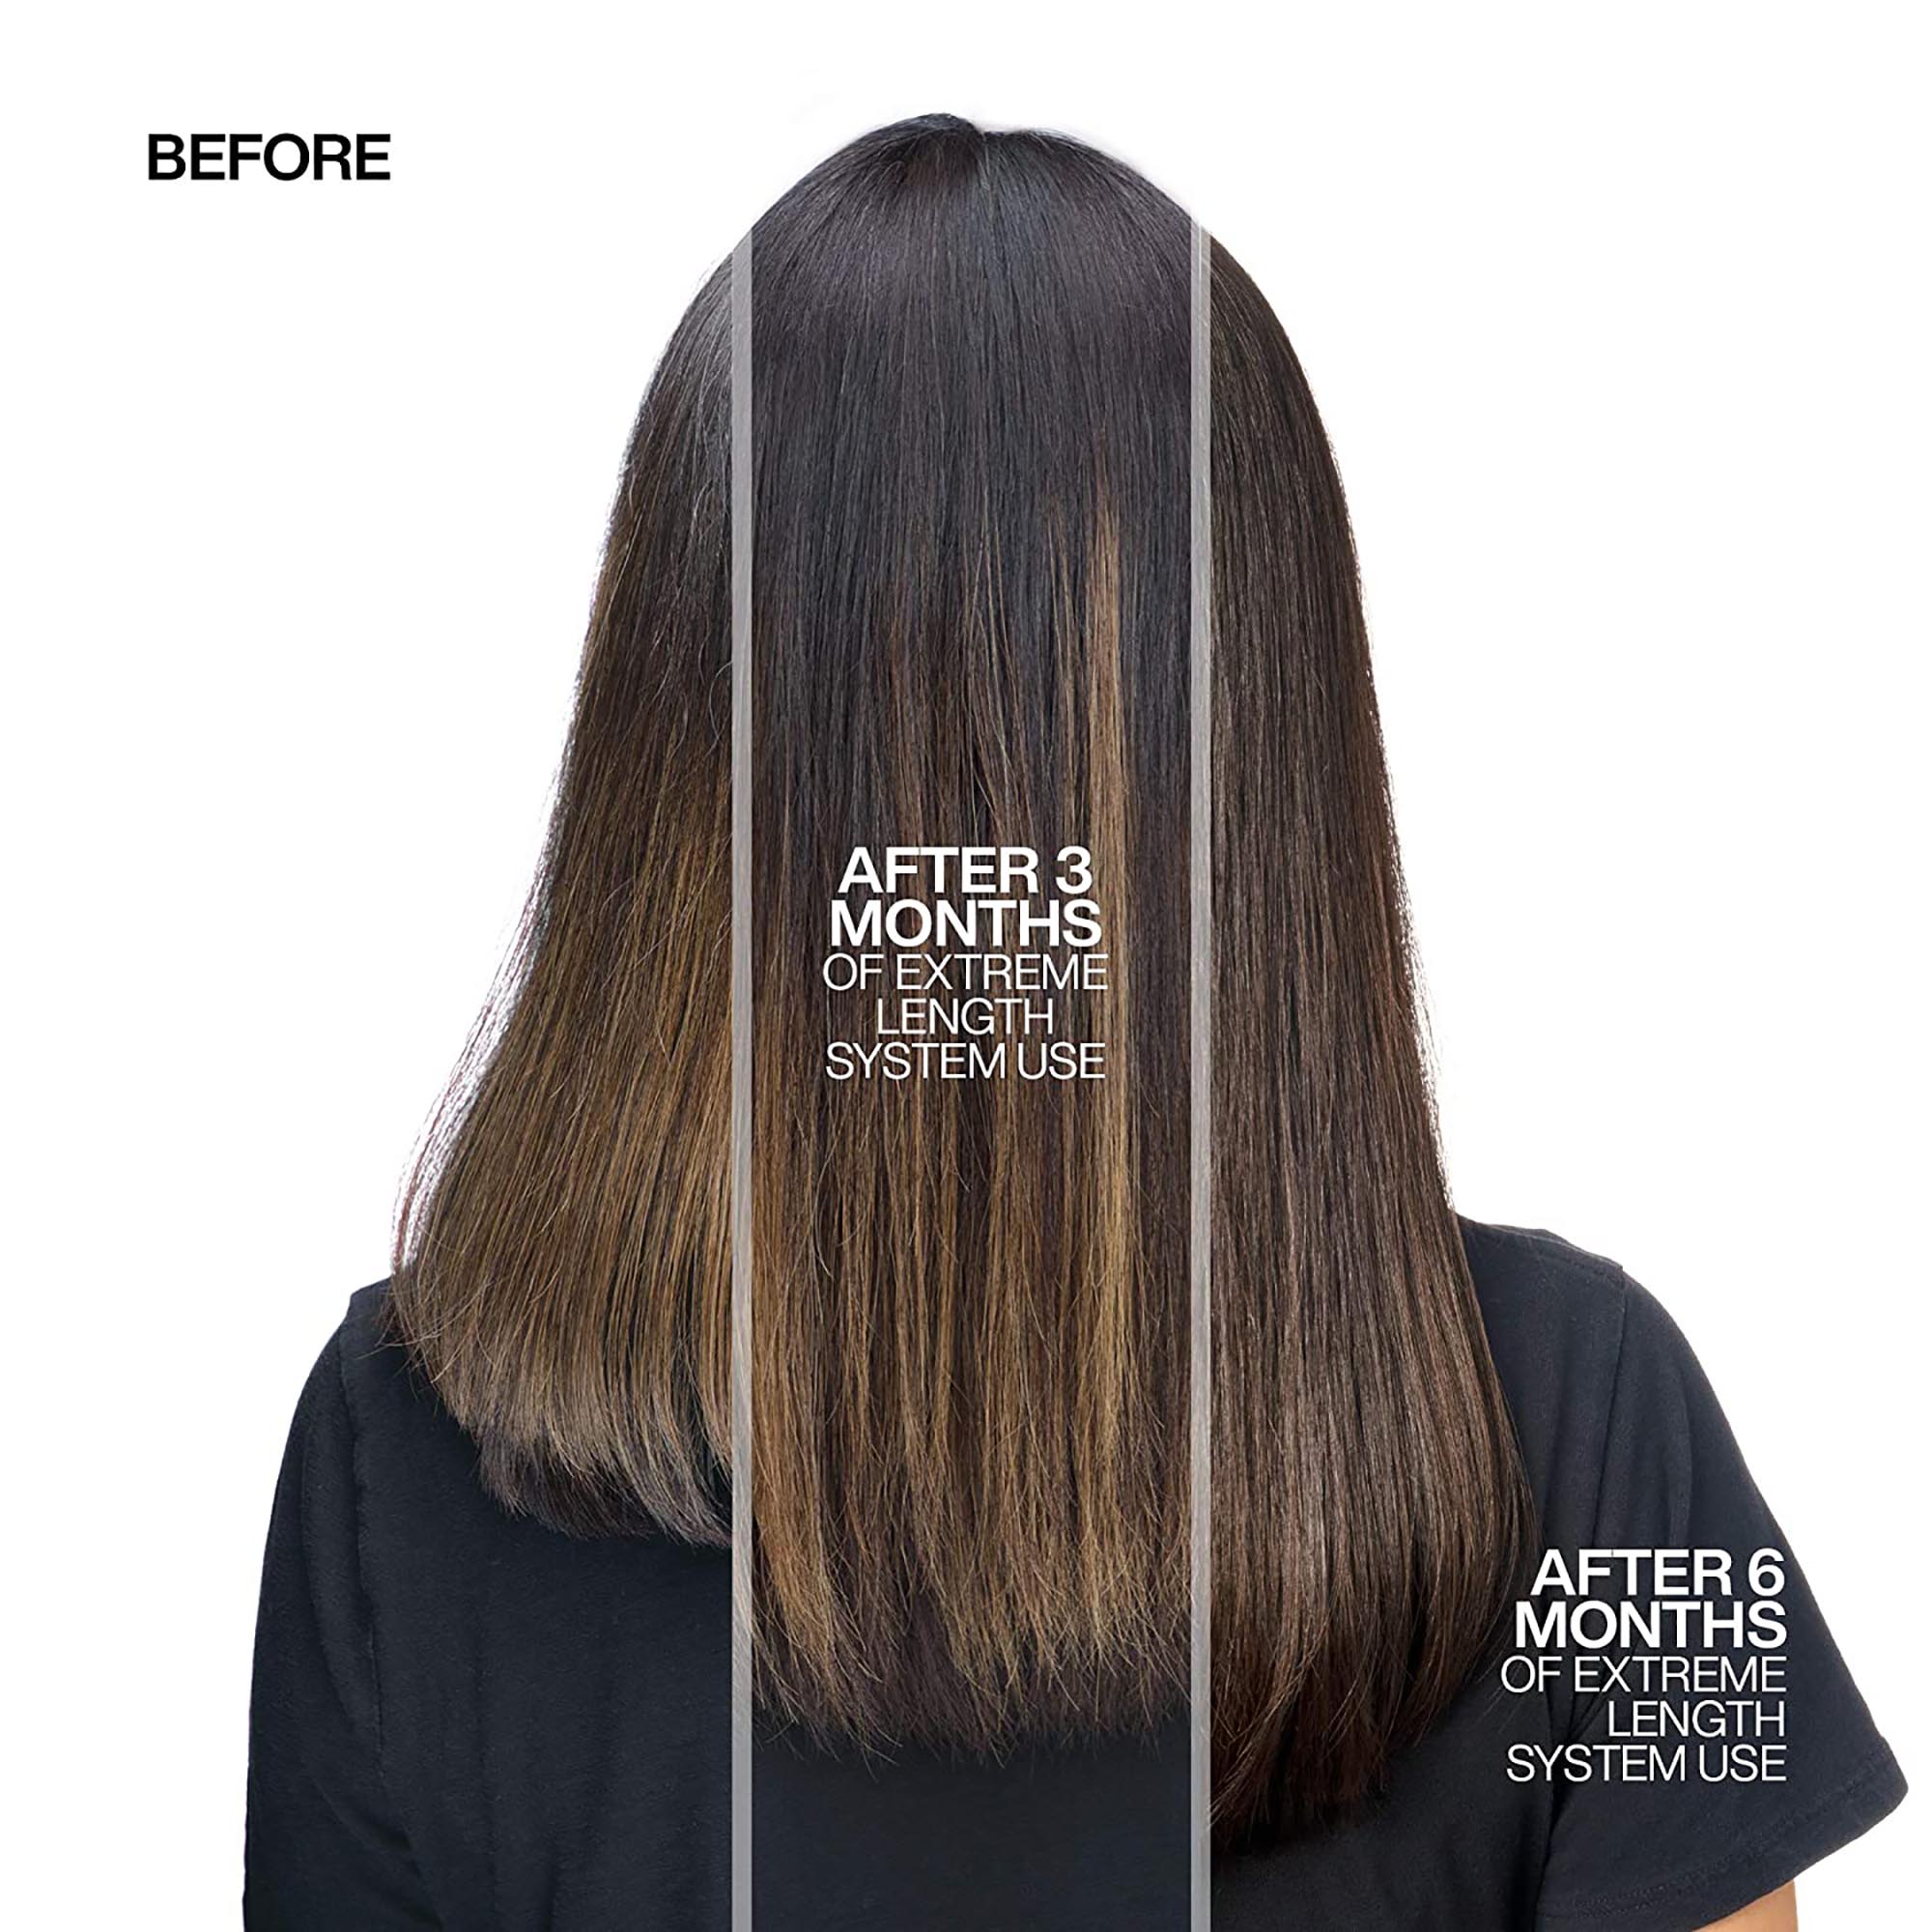 Redken Extreme Length with Biotin Shampoo & Conditioner Duo (Value $104) / DUO